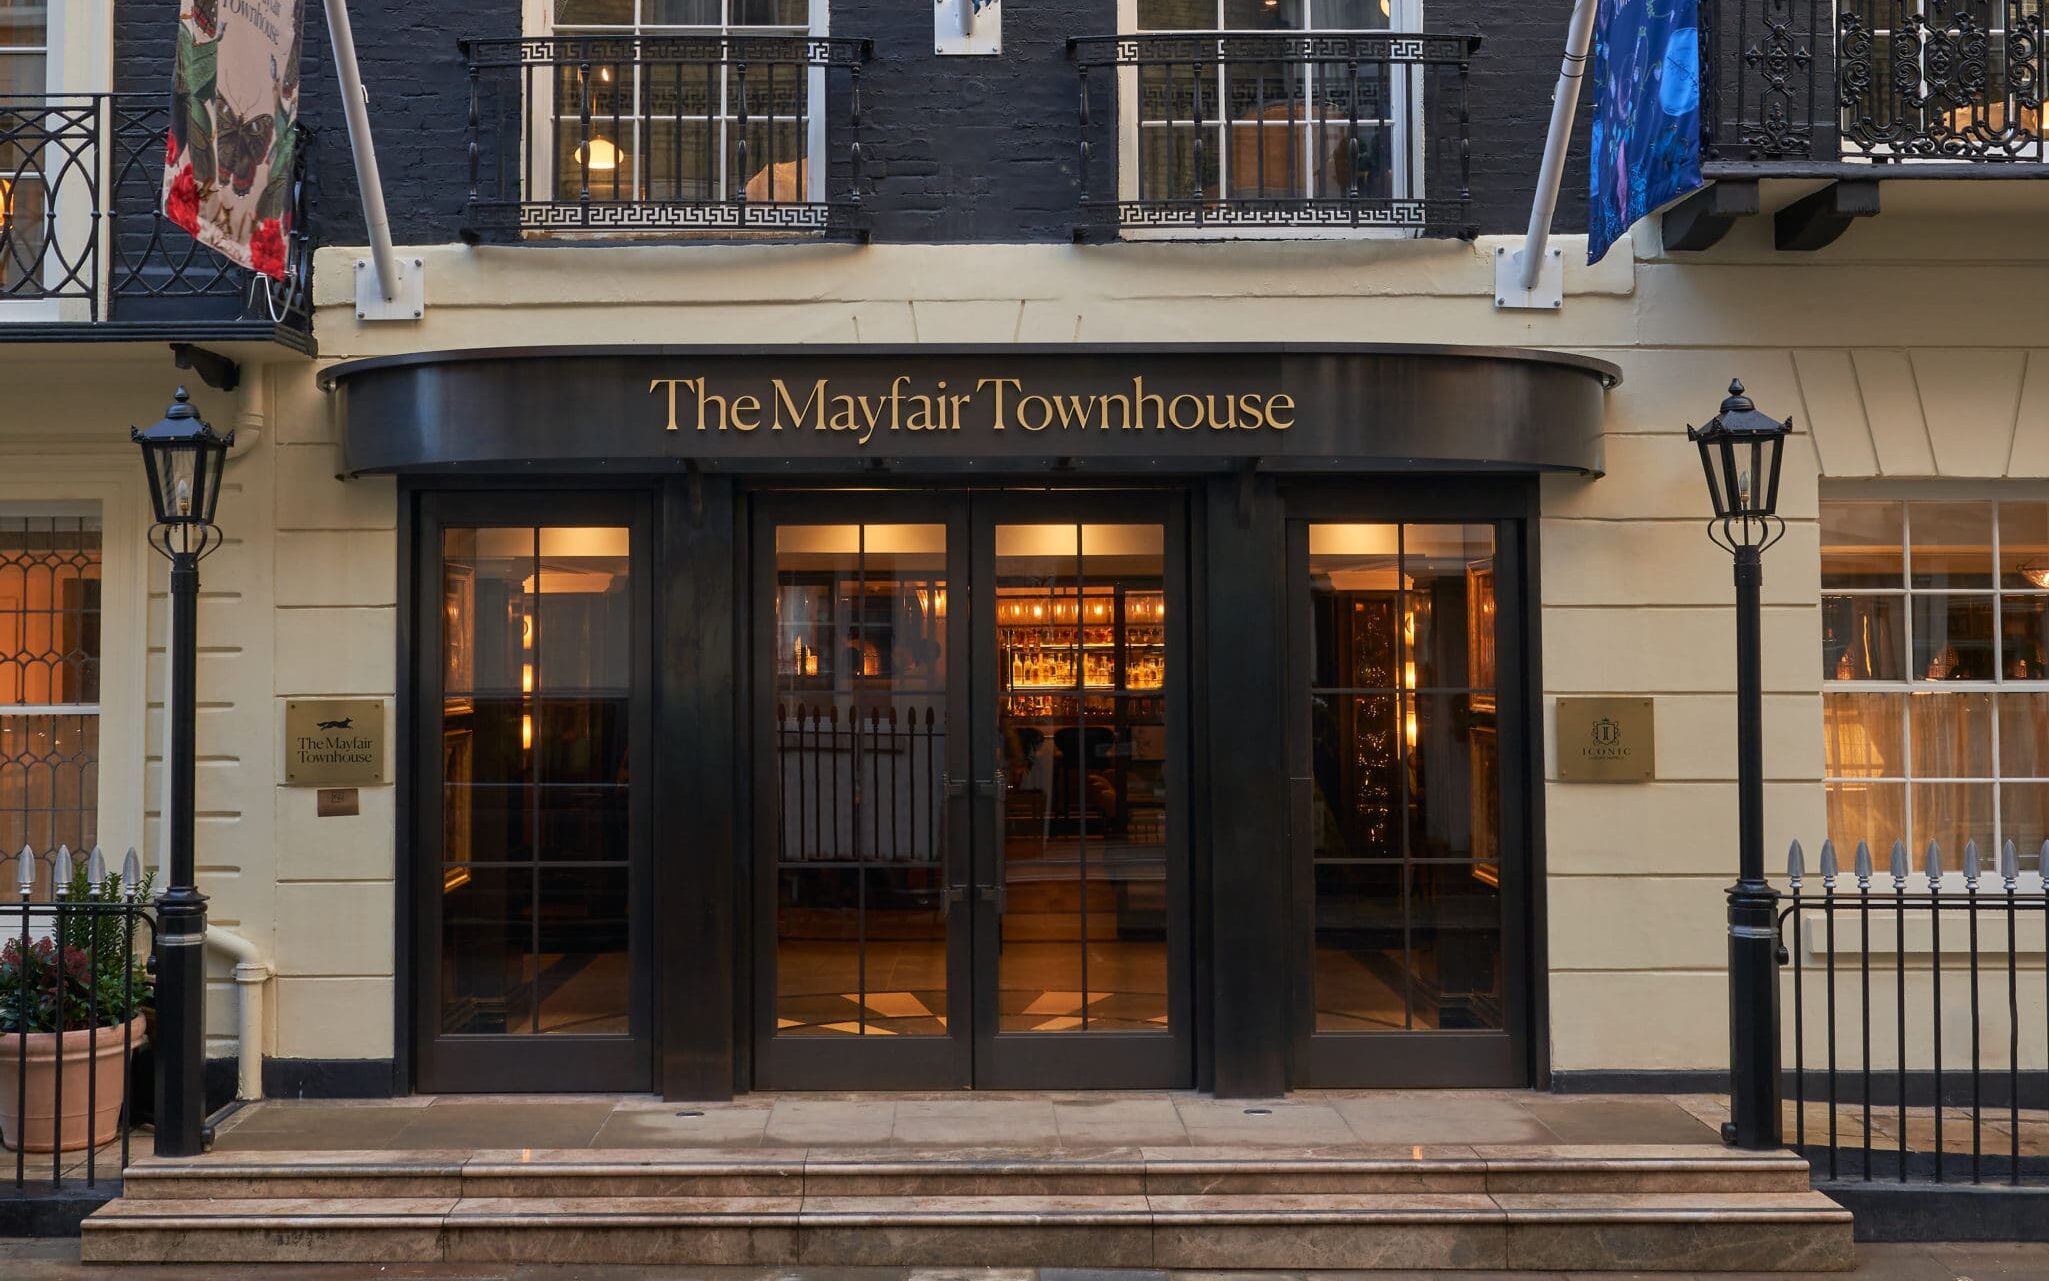 The Mayfair Townhouse: A British-Inspired Boutique Hotel In The Heart of London